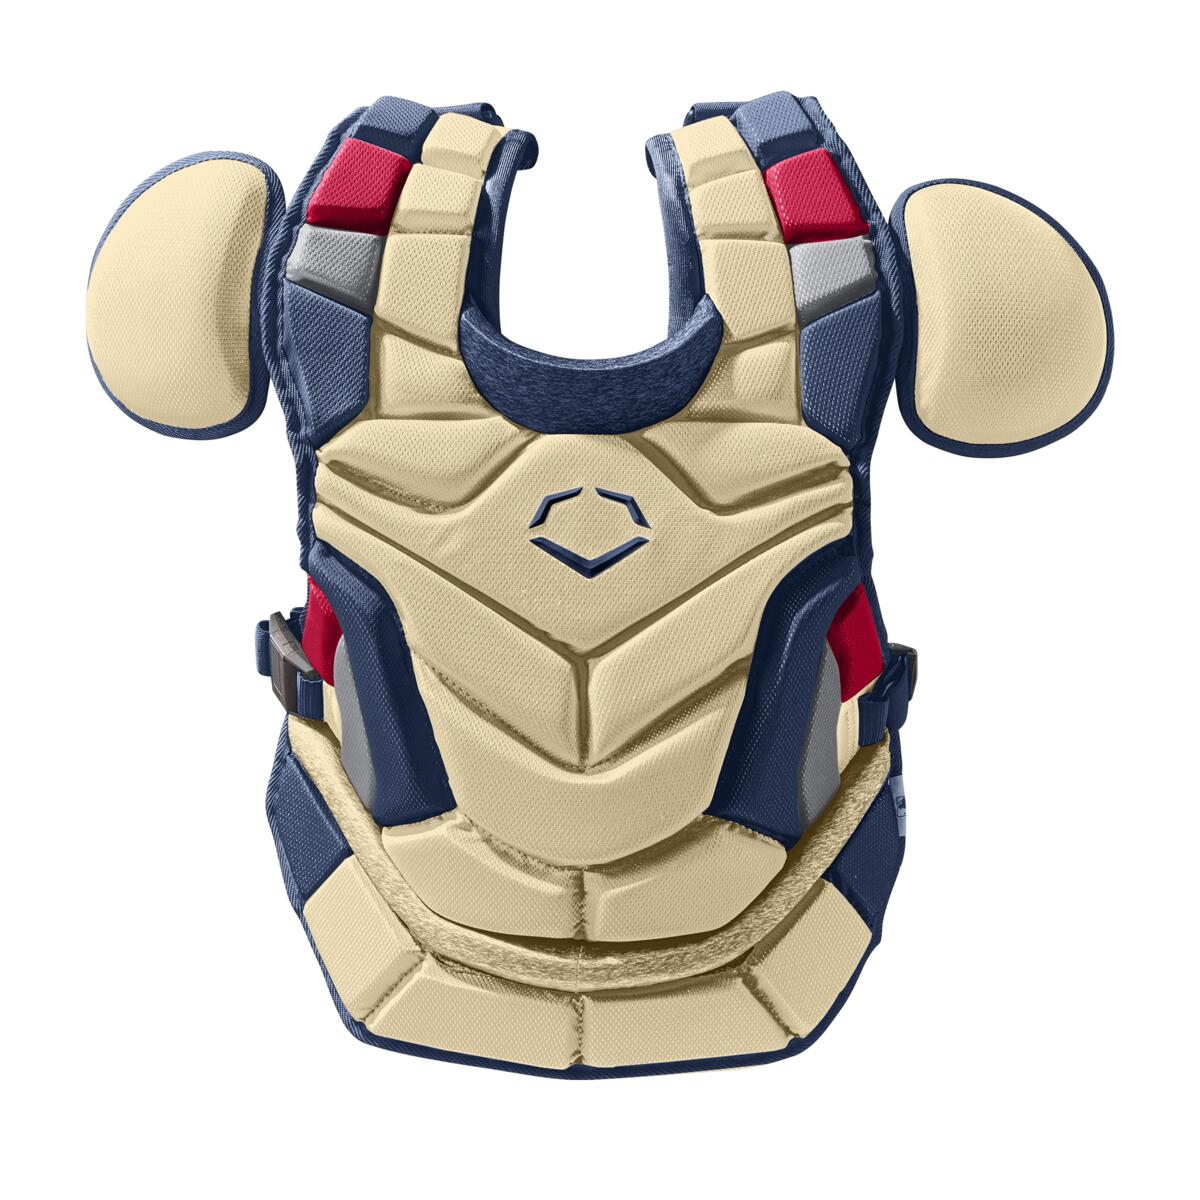 Pro-SRZ™ Baseball Catcher's Chest Protector - Adult